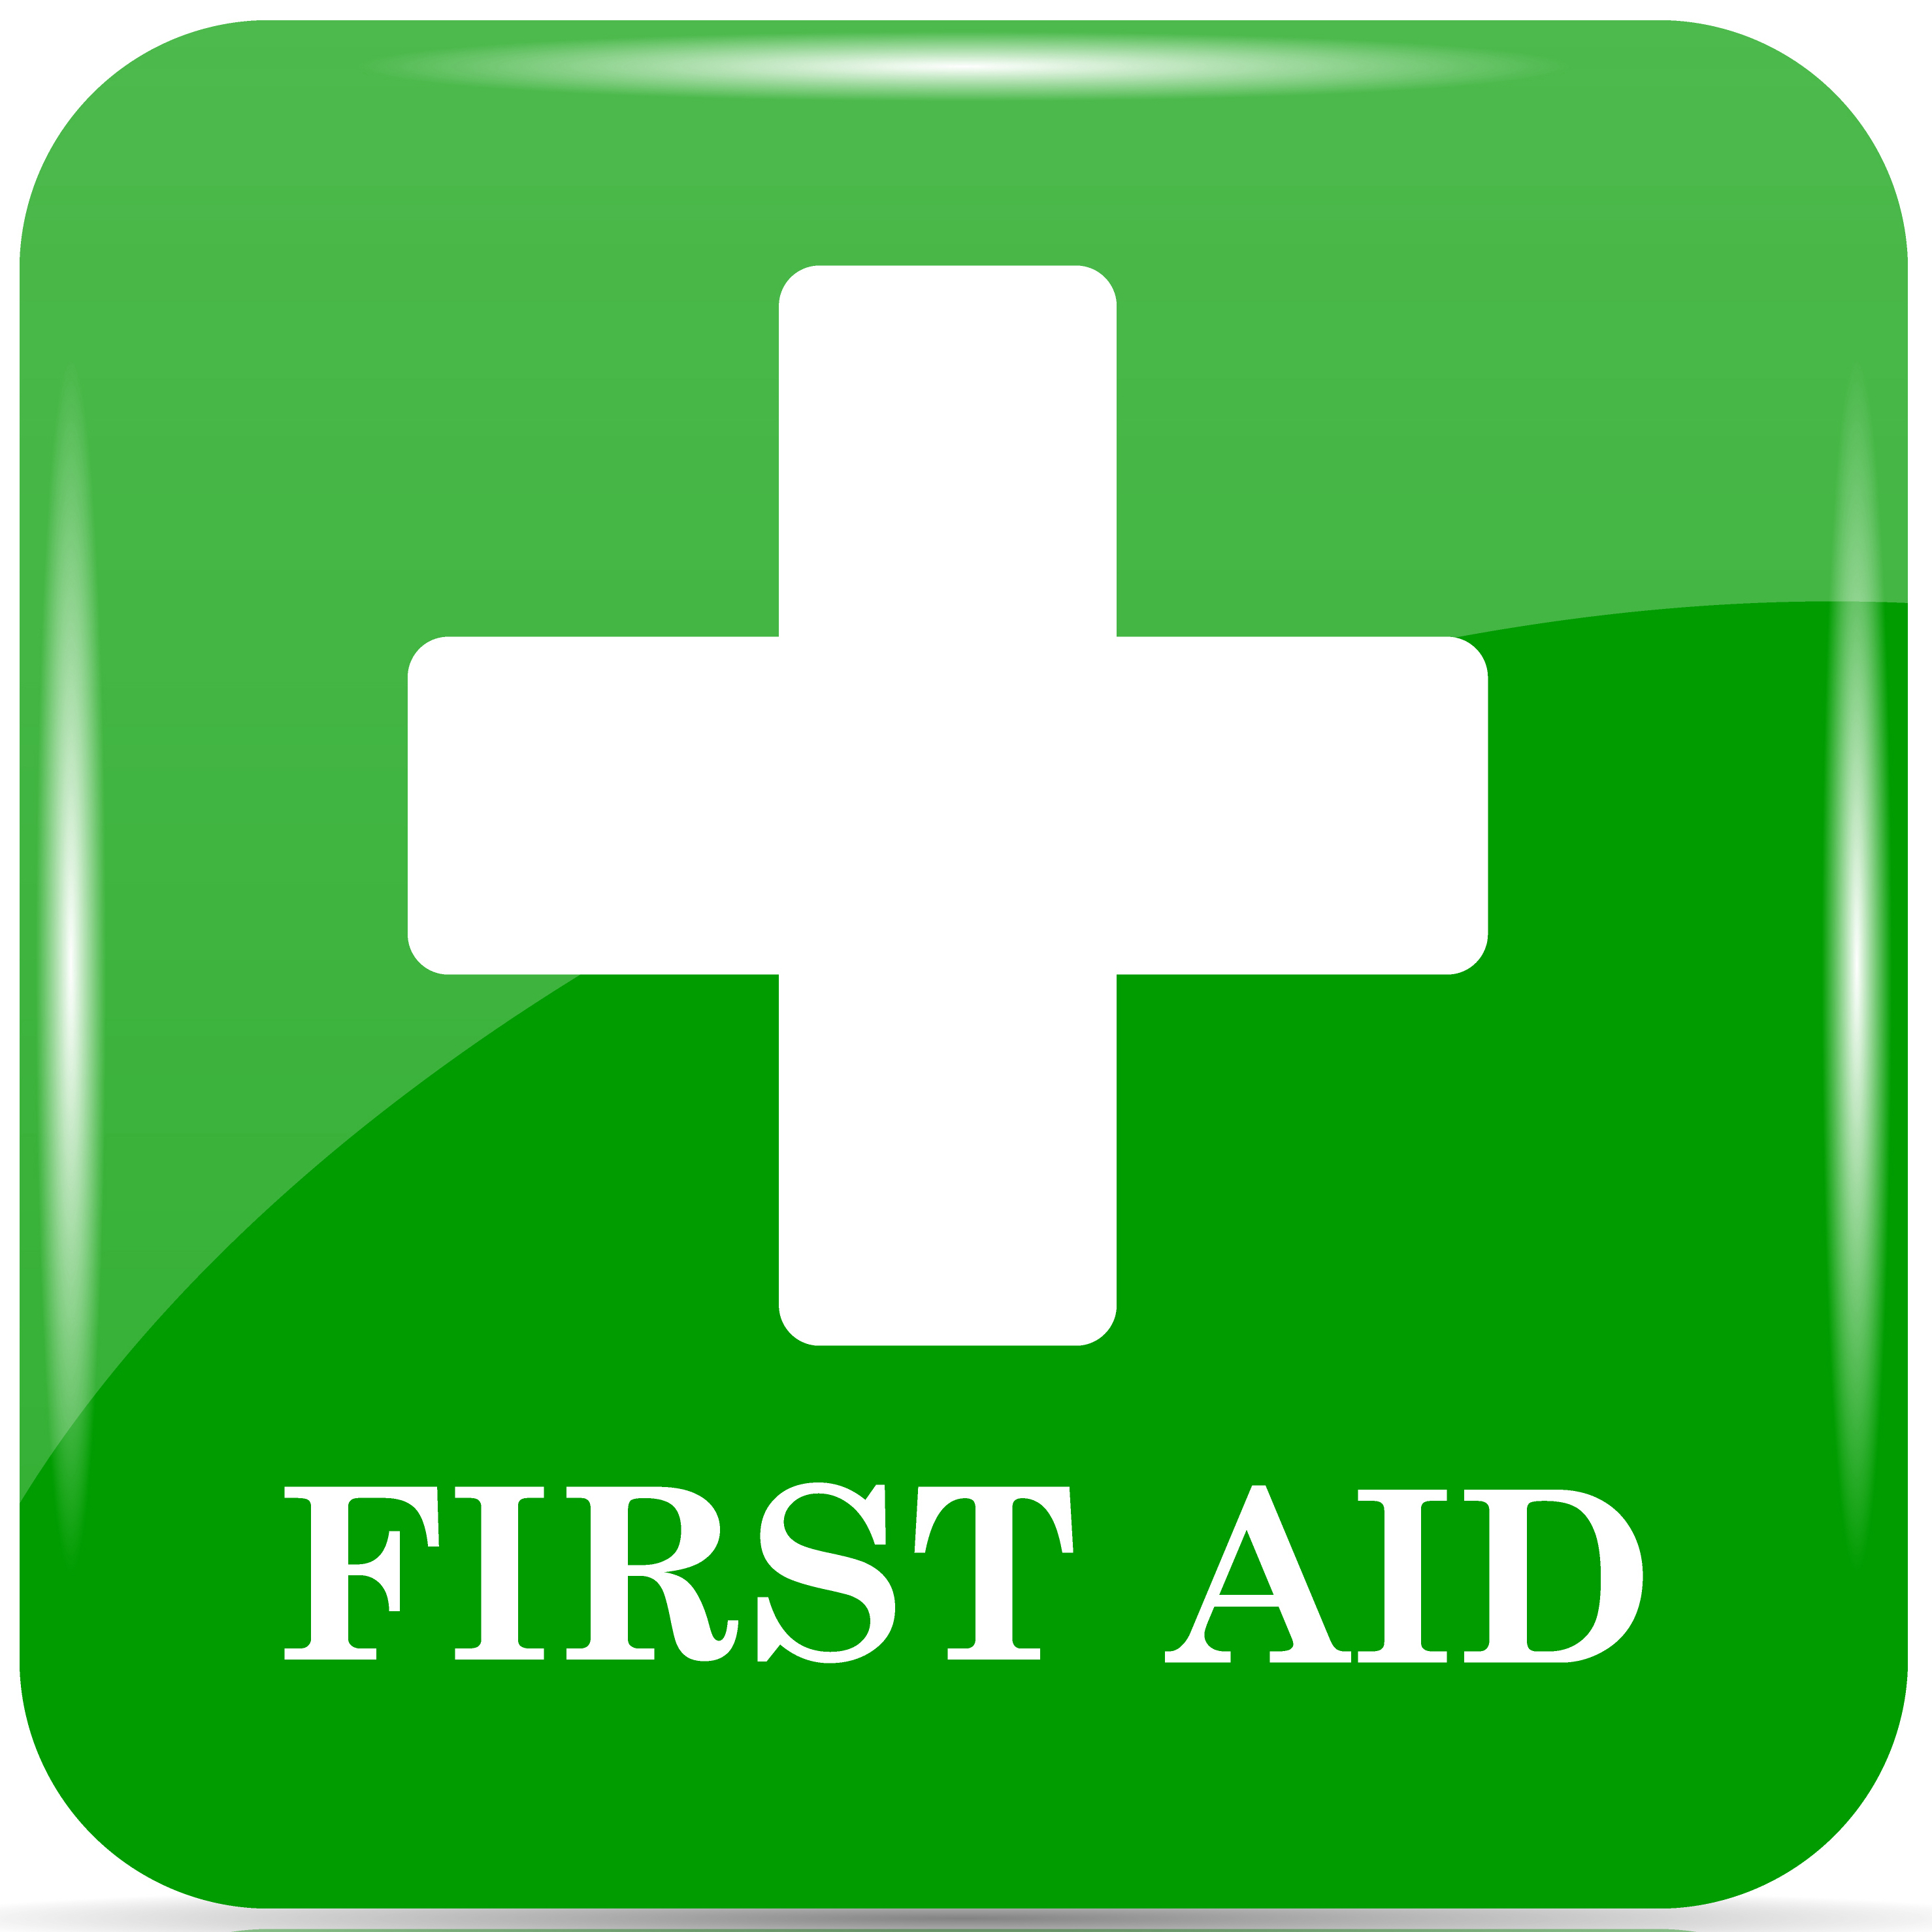 First Aid Products at Body and Mind Studio International